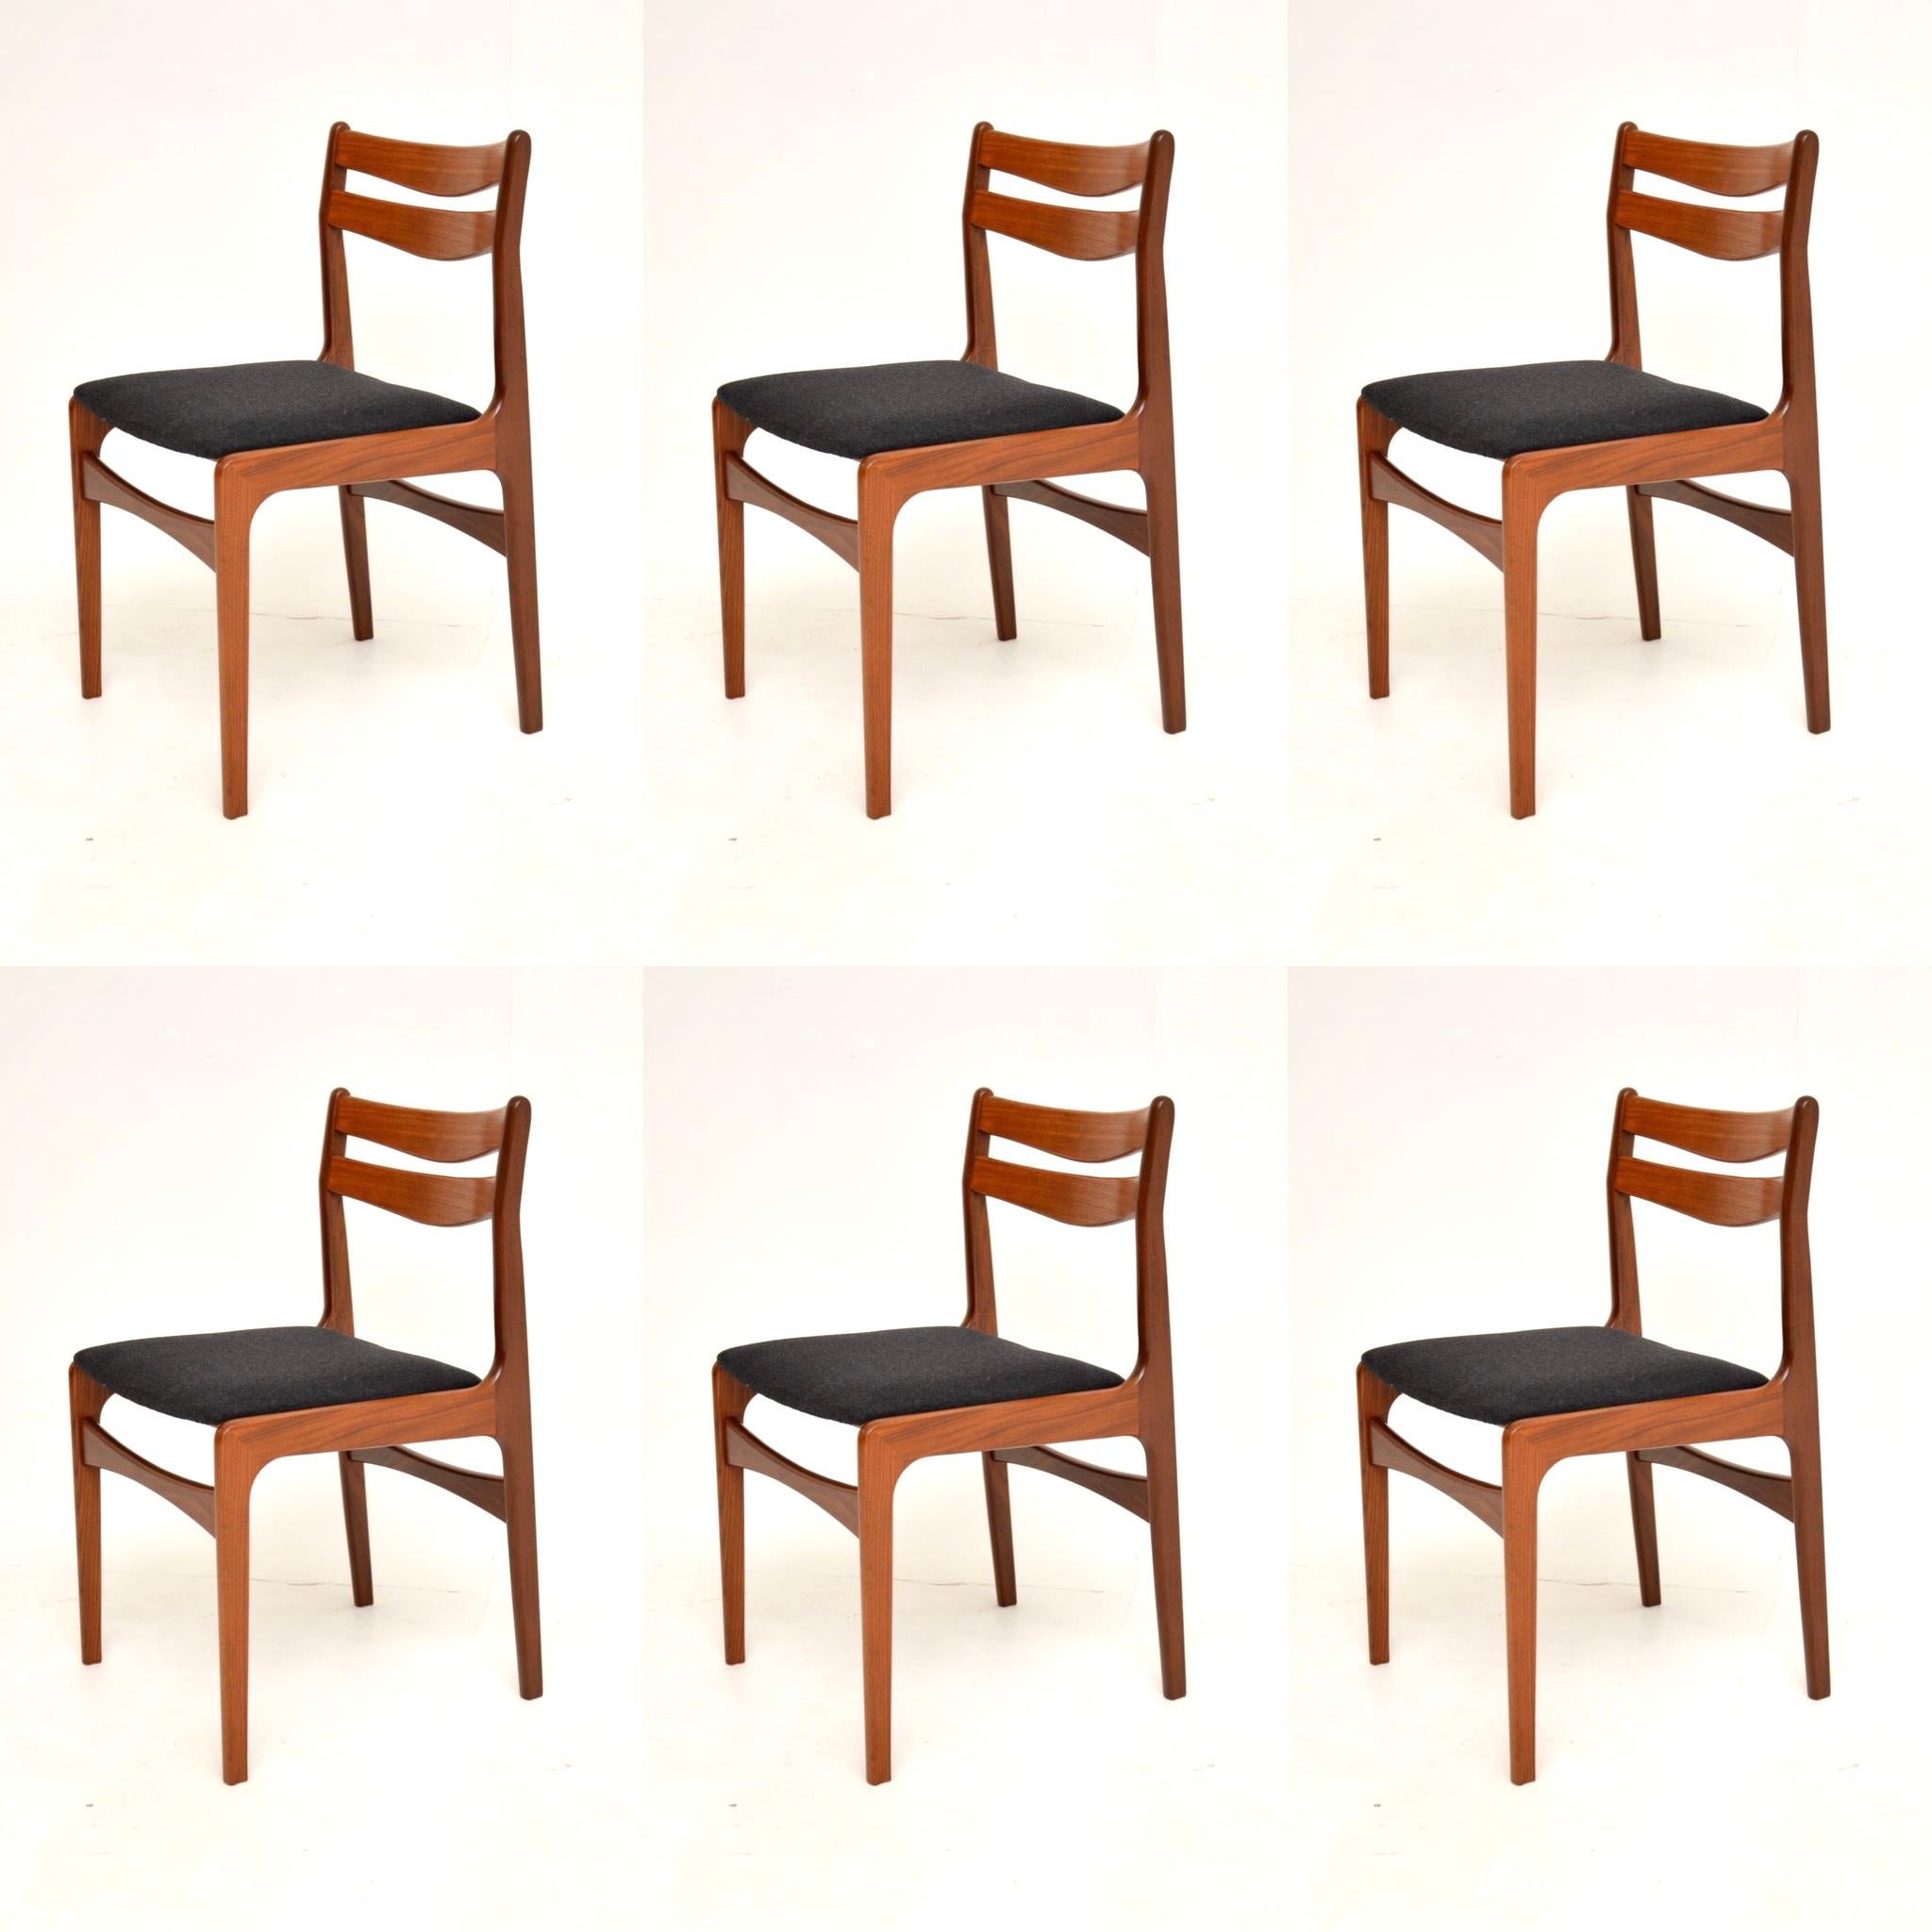 A stylish and extremely well made set of six Danish vintage dining chairs. They were made in Denmark, and date from the 1960’s.

The quality is fantastic, the frames are solid afromosia wood, with solid teak back rests. They have a beautiful and